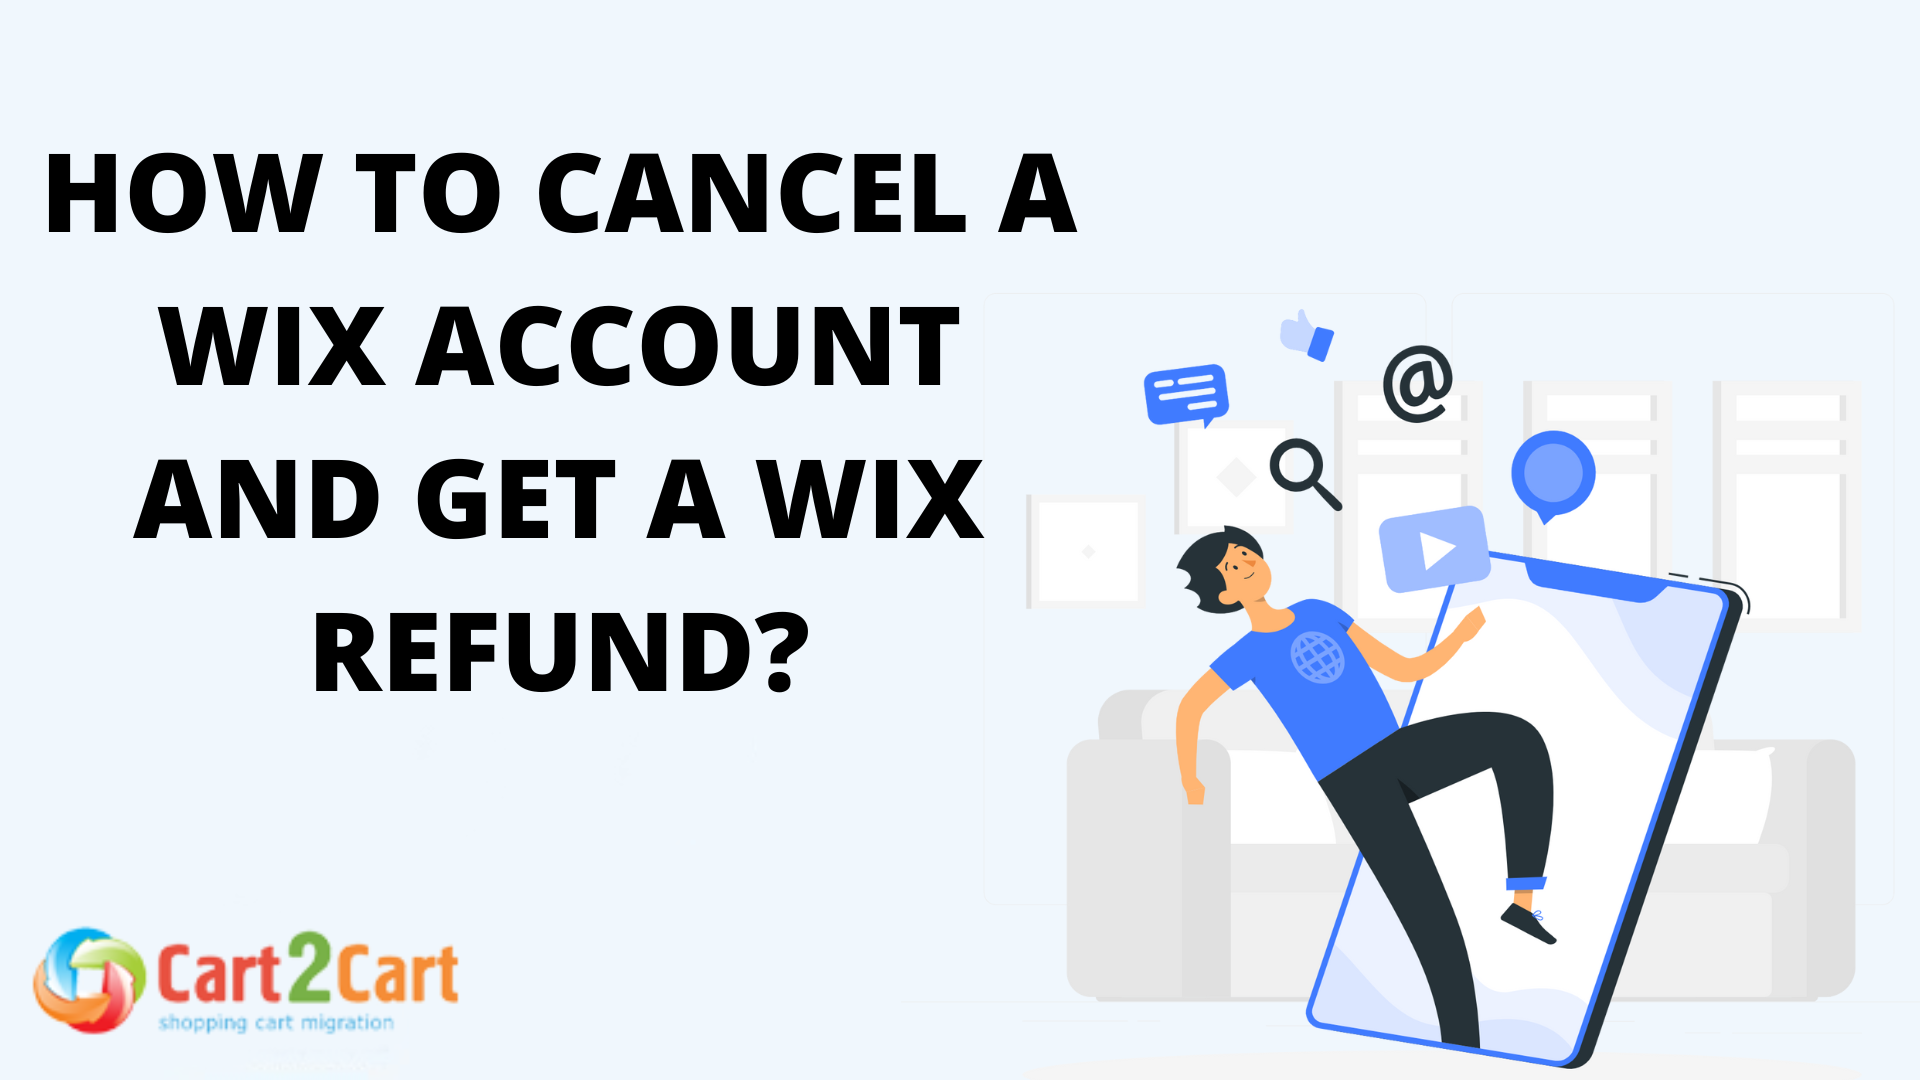 How to Cancel a Wix Account and Get a Wix Refund